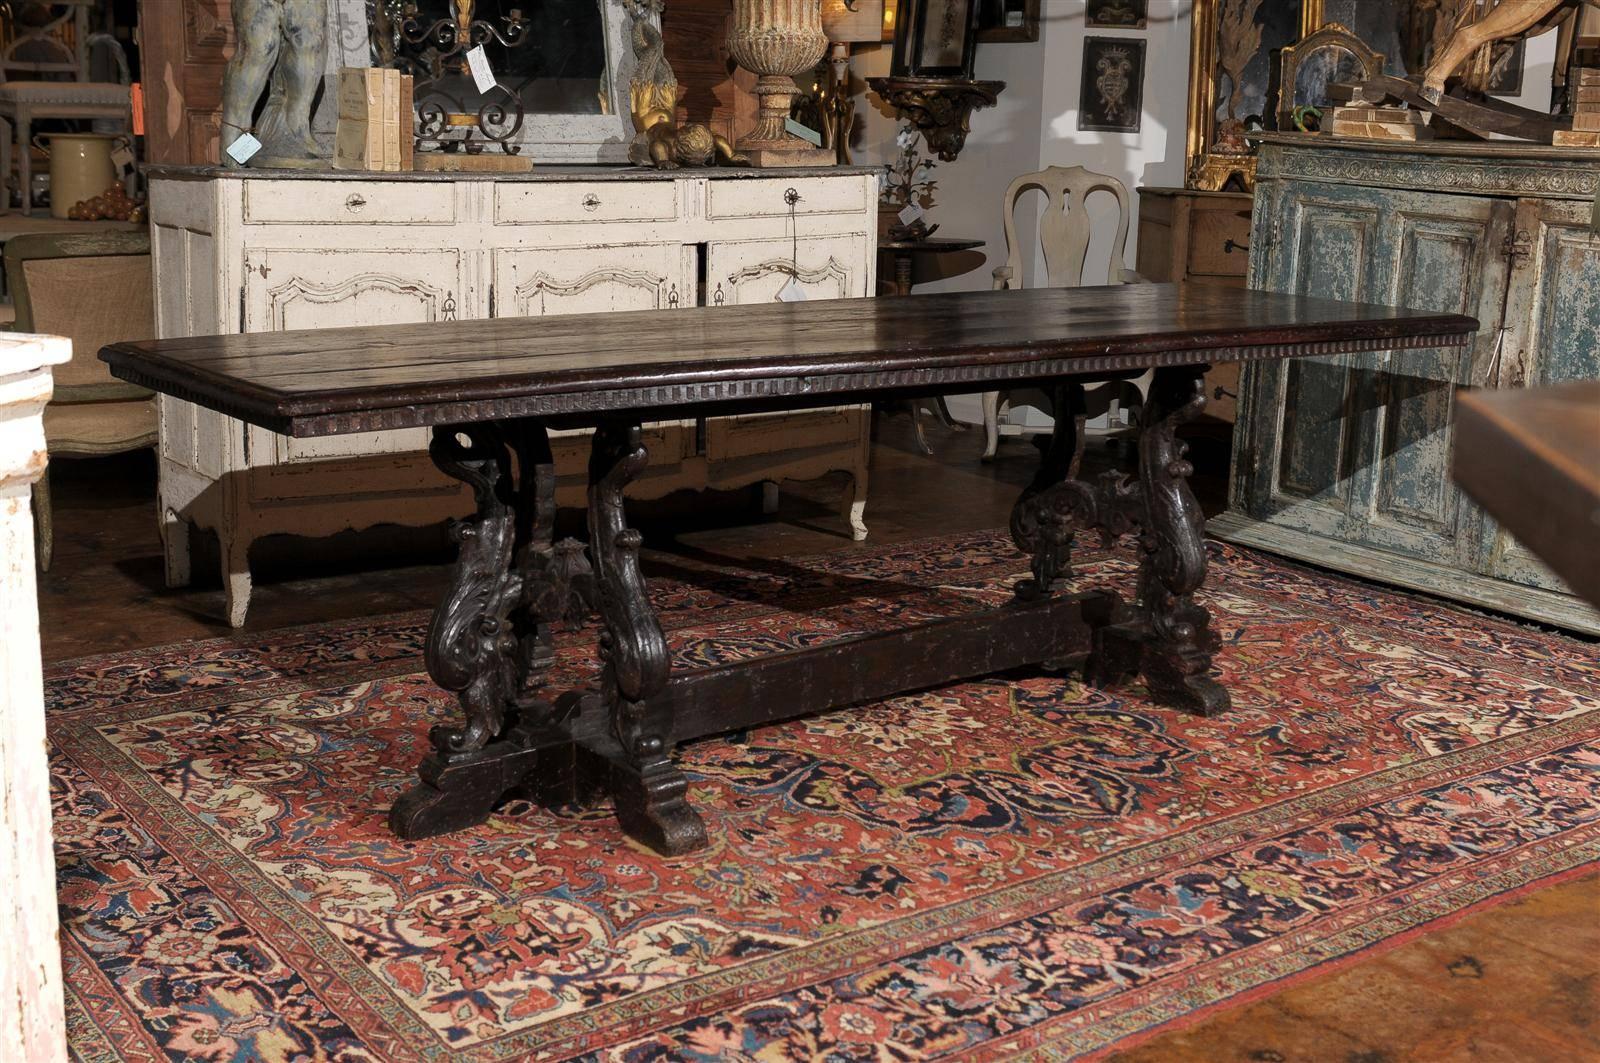 An Italian Baroque style carved oak library table with volute legs and stretcher from the early to mid 19th century. This Italian library table from the first half of the 19th century features a rectangular top with rounded edge and symmetrically